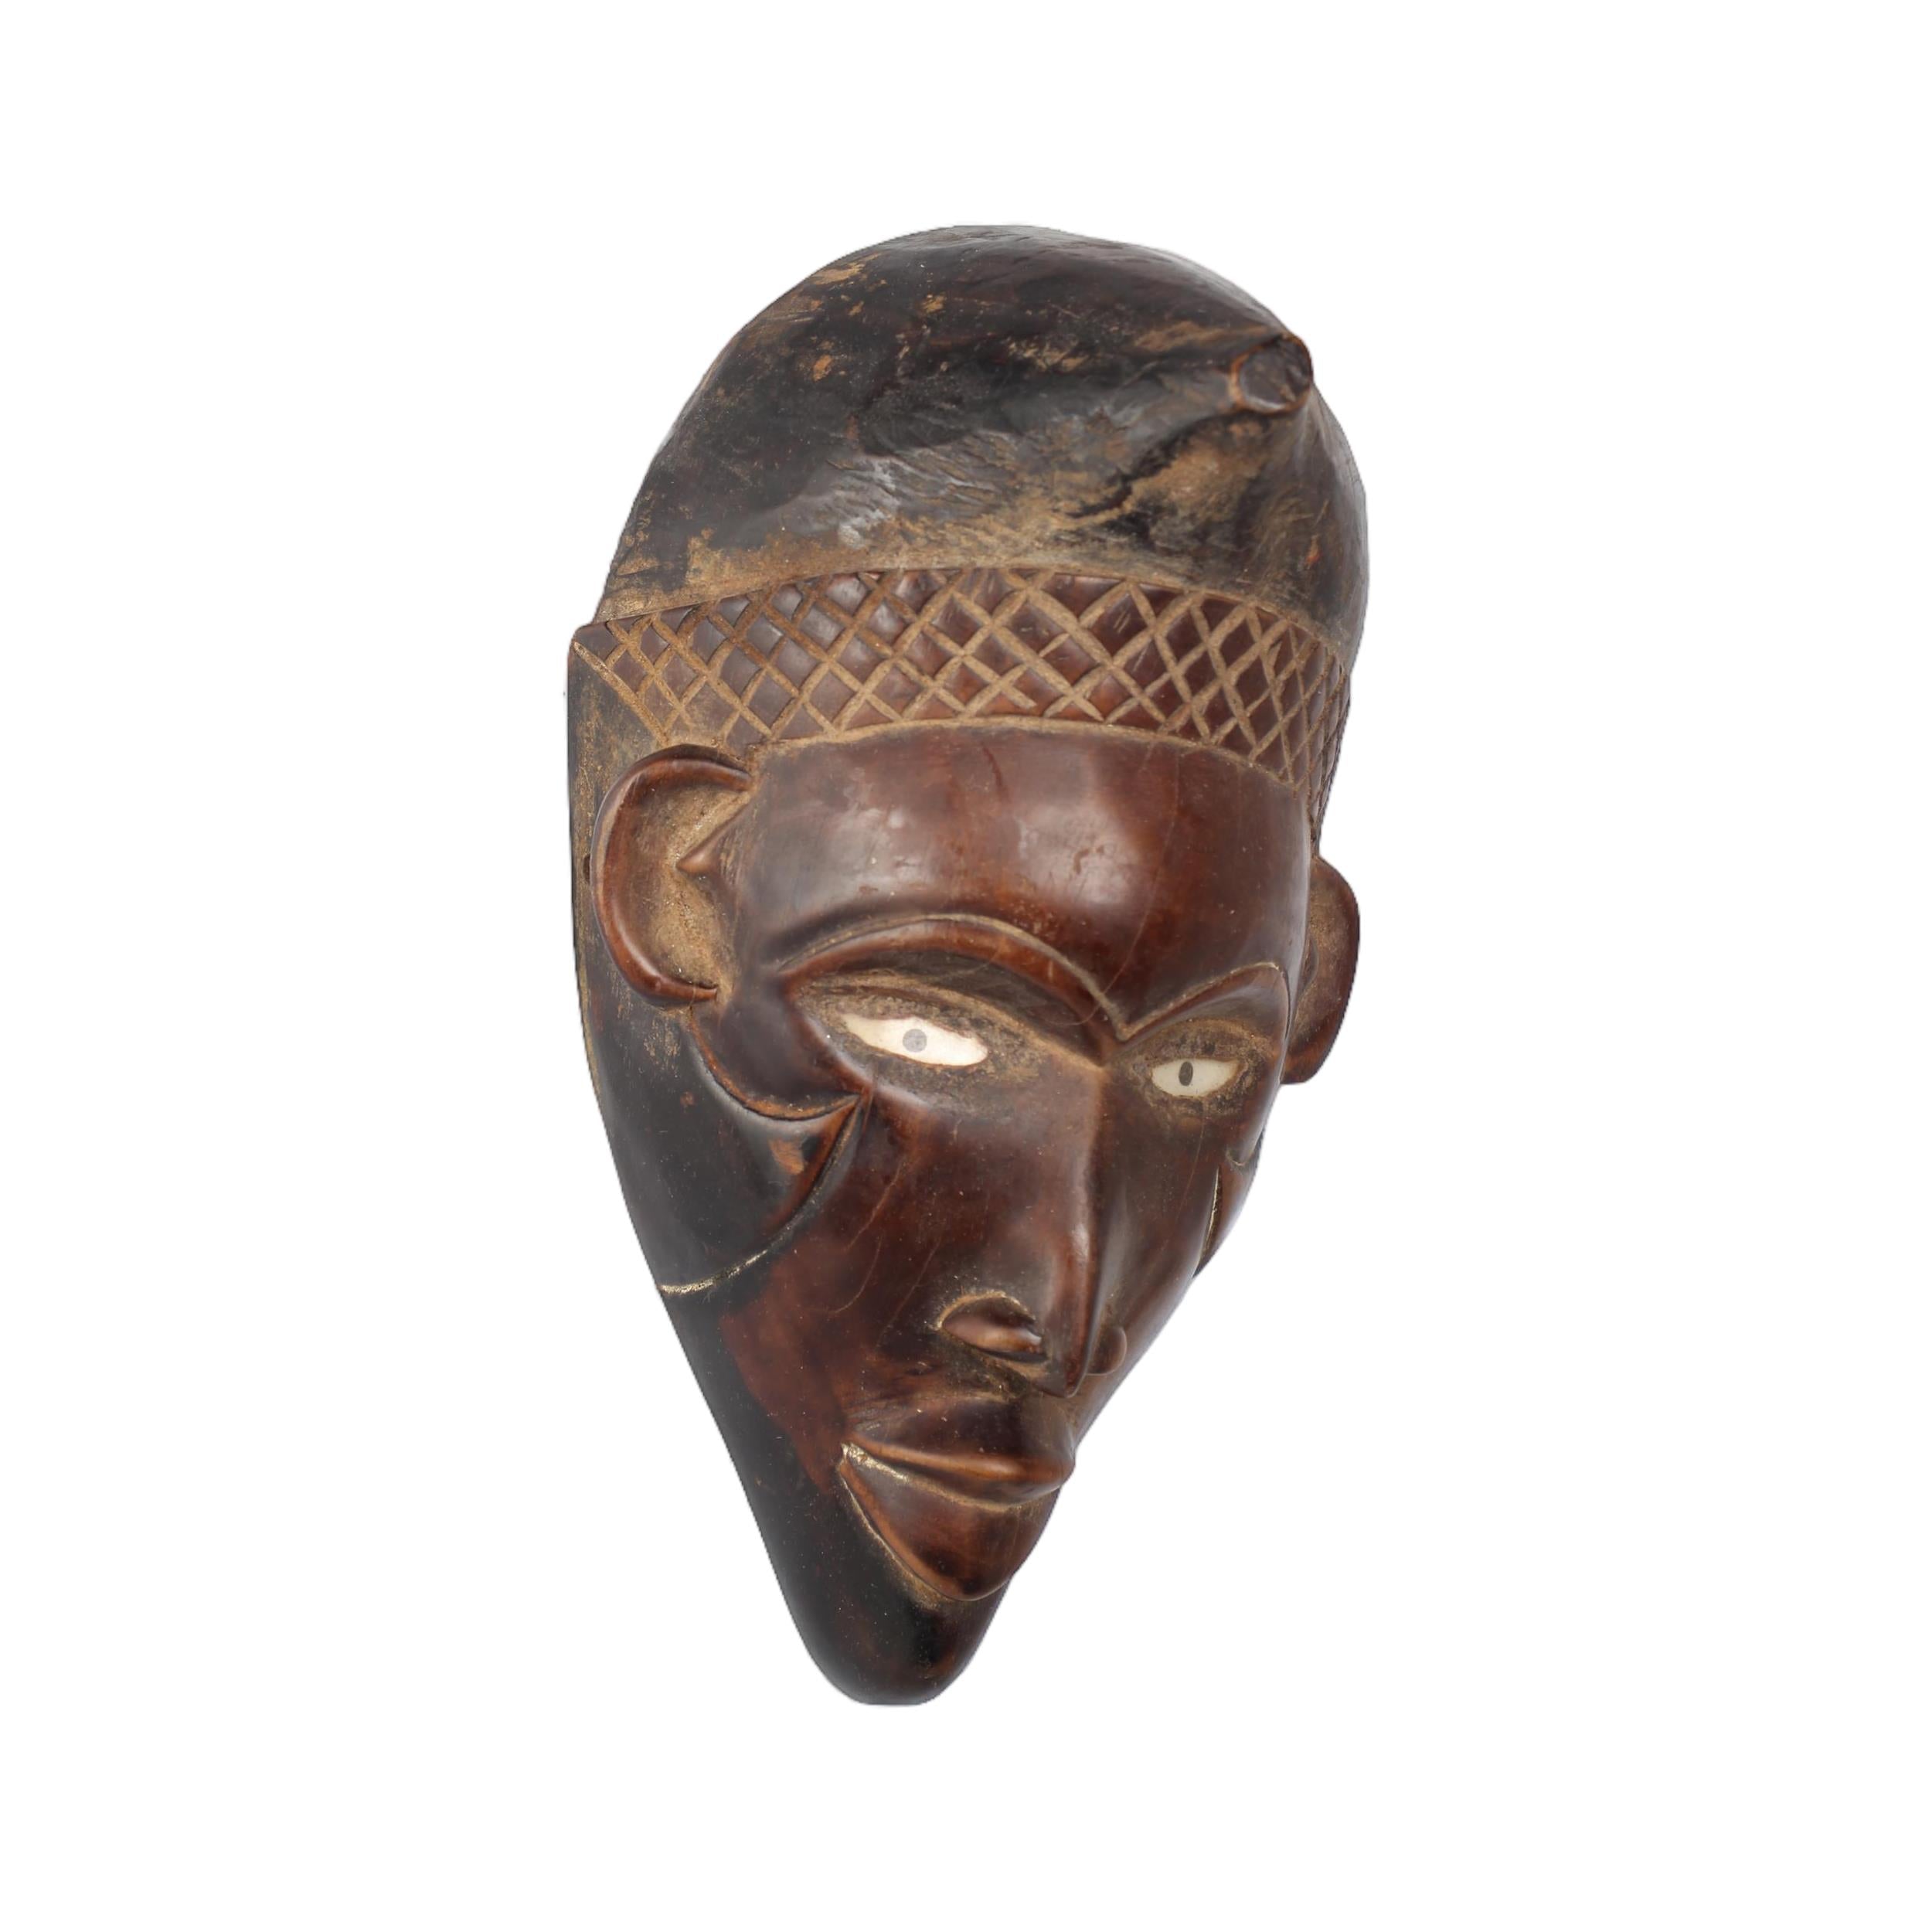 Pende Tribe Mask ~9.4" Tall - Mask